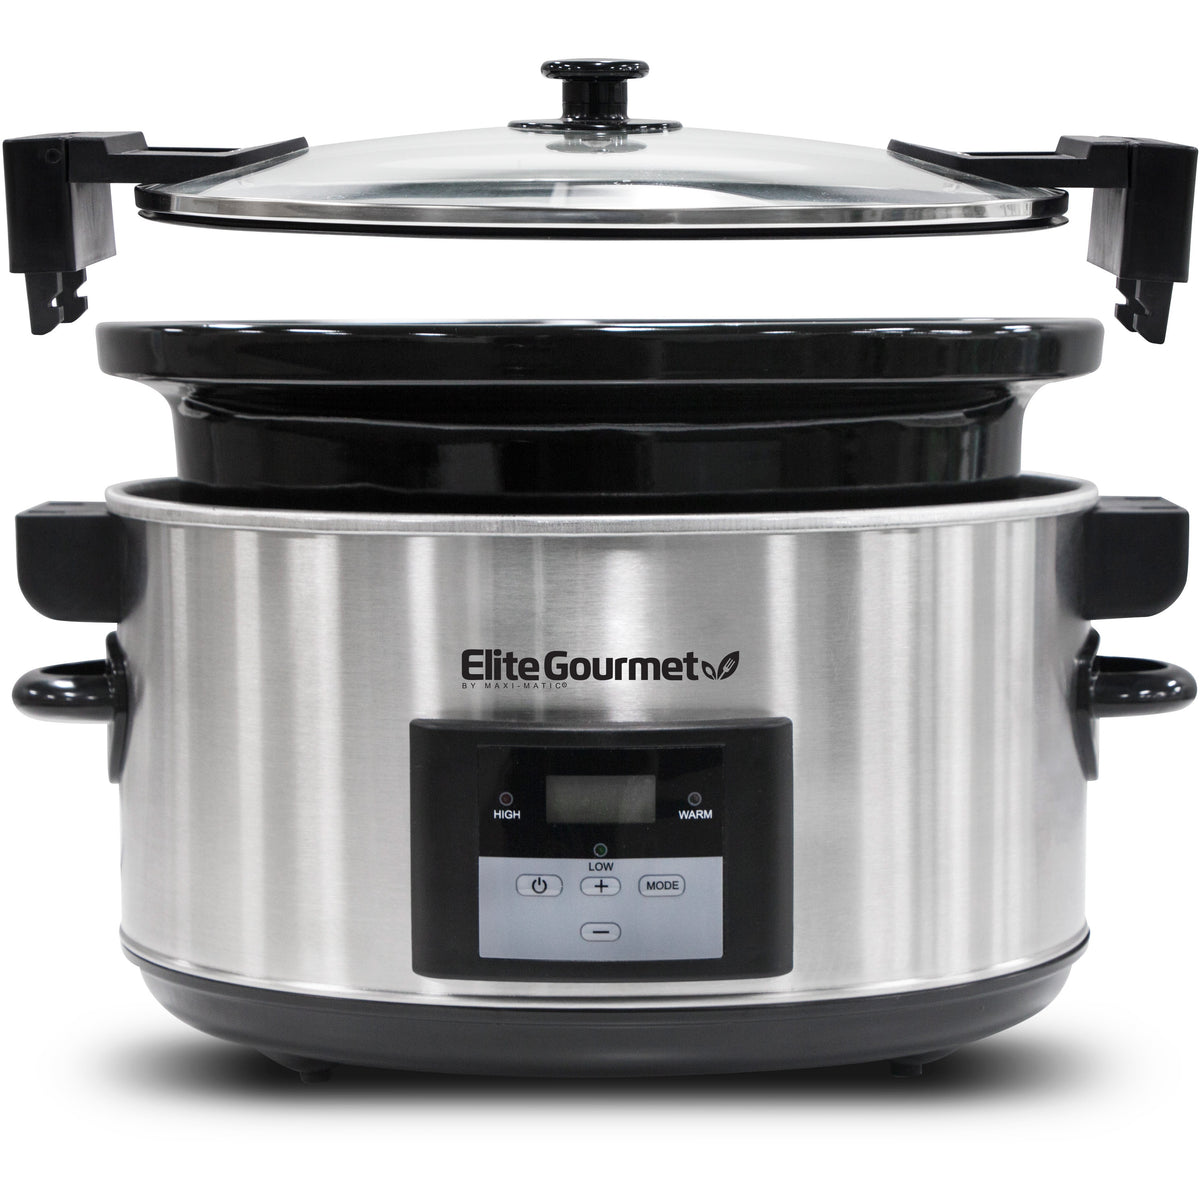 Elite 8.5-Quart Red Oval Slow Cooker with Stoneware Liner - Programmable,  Keep Warm Setting, Gourmet Stainless Steel Model